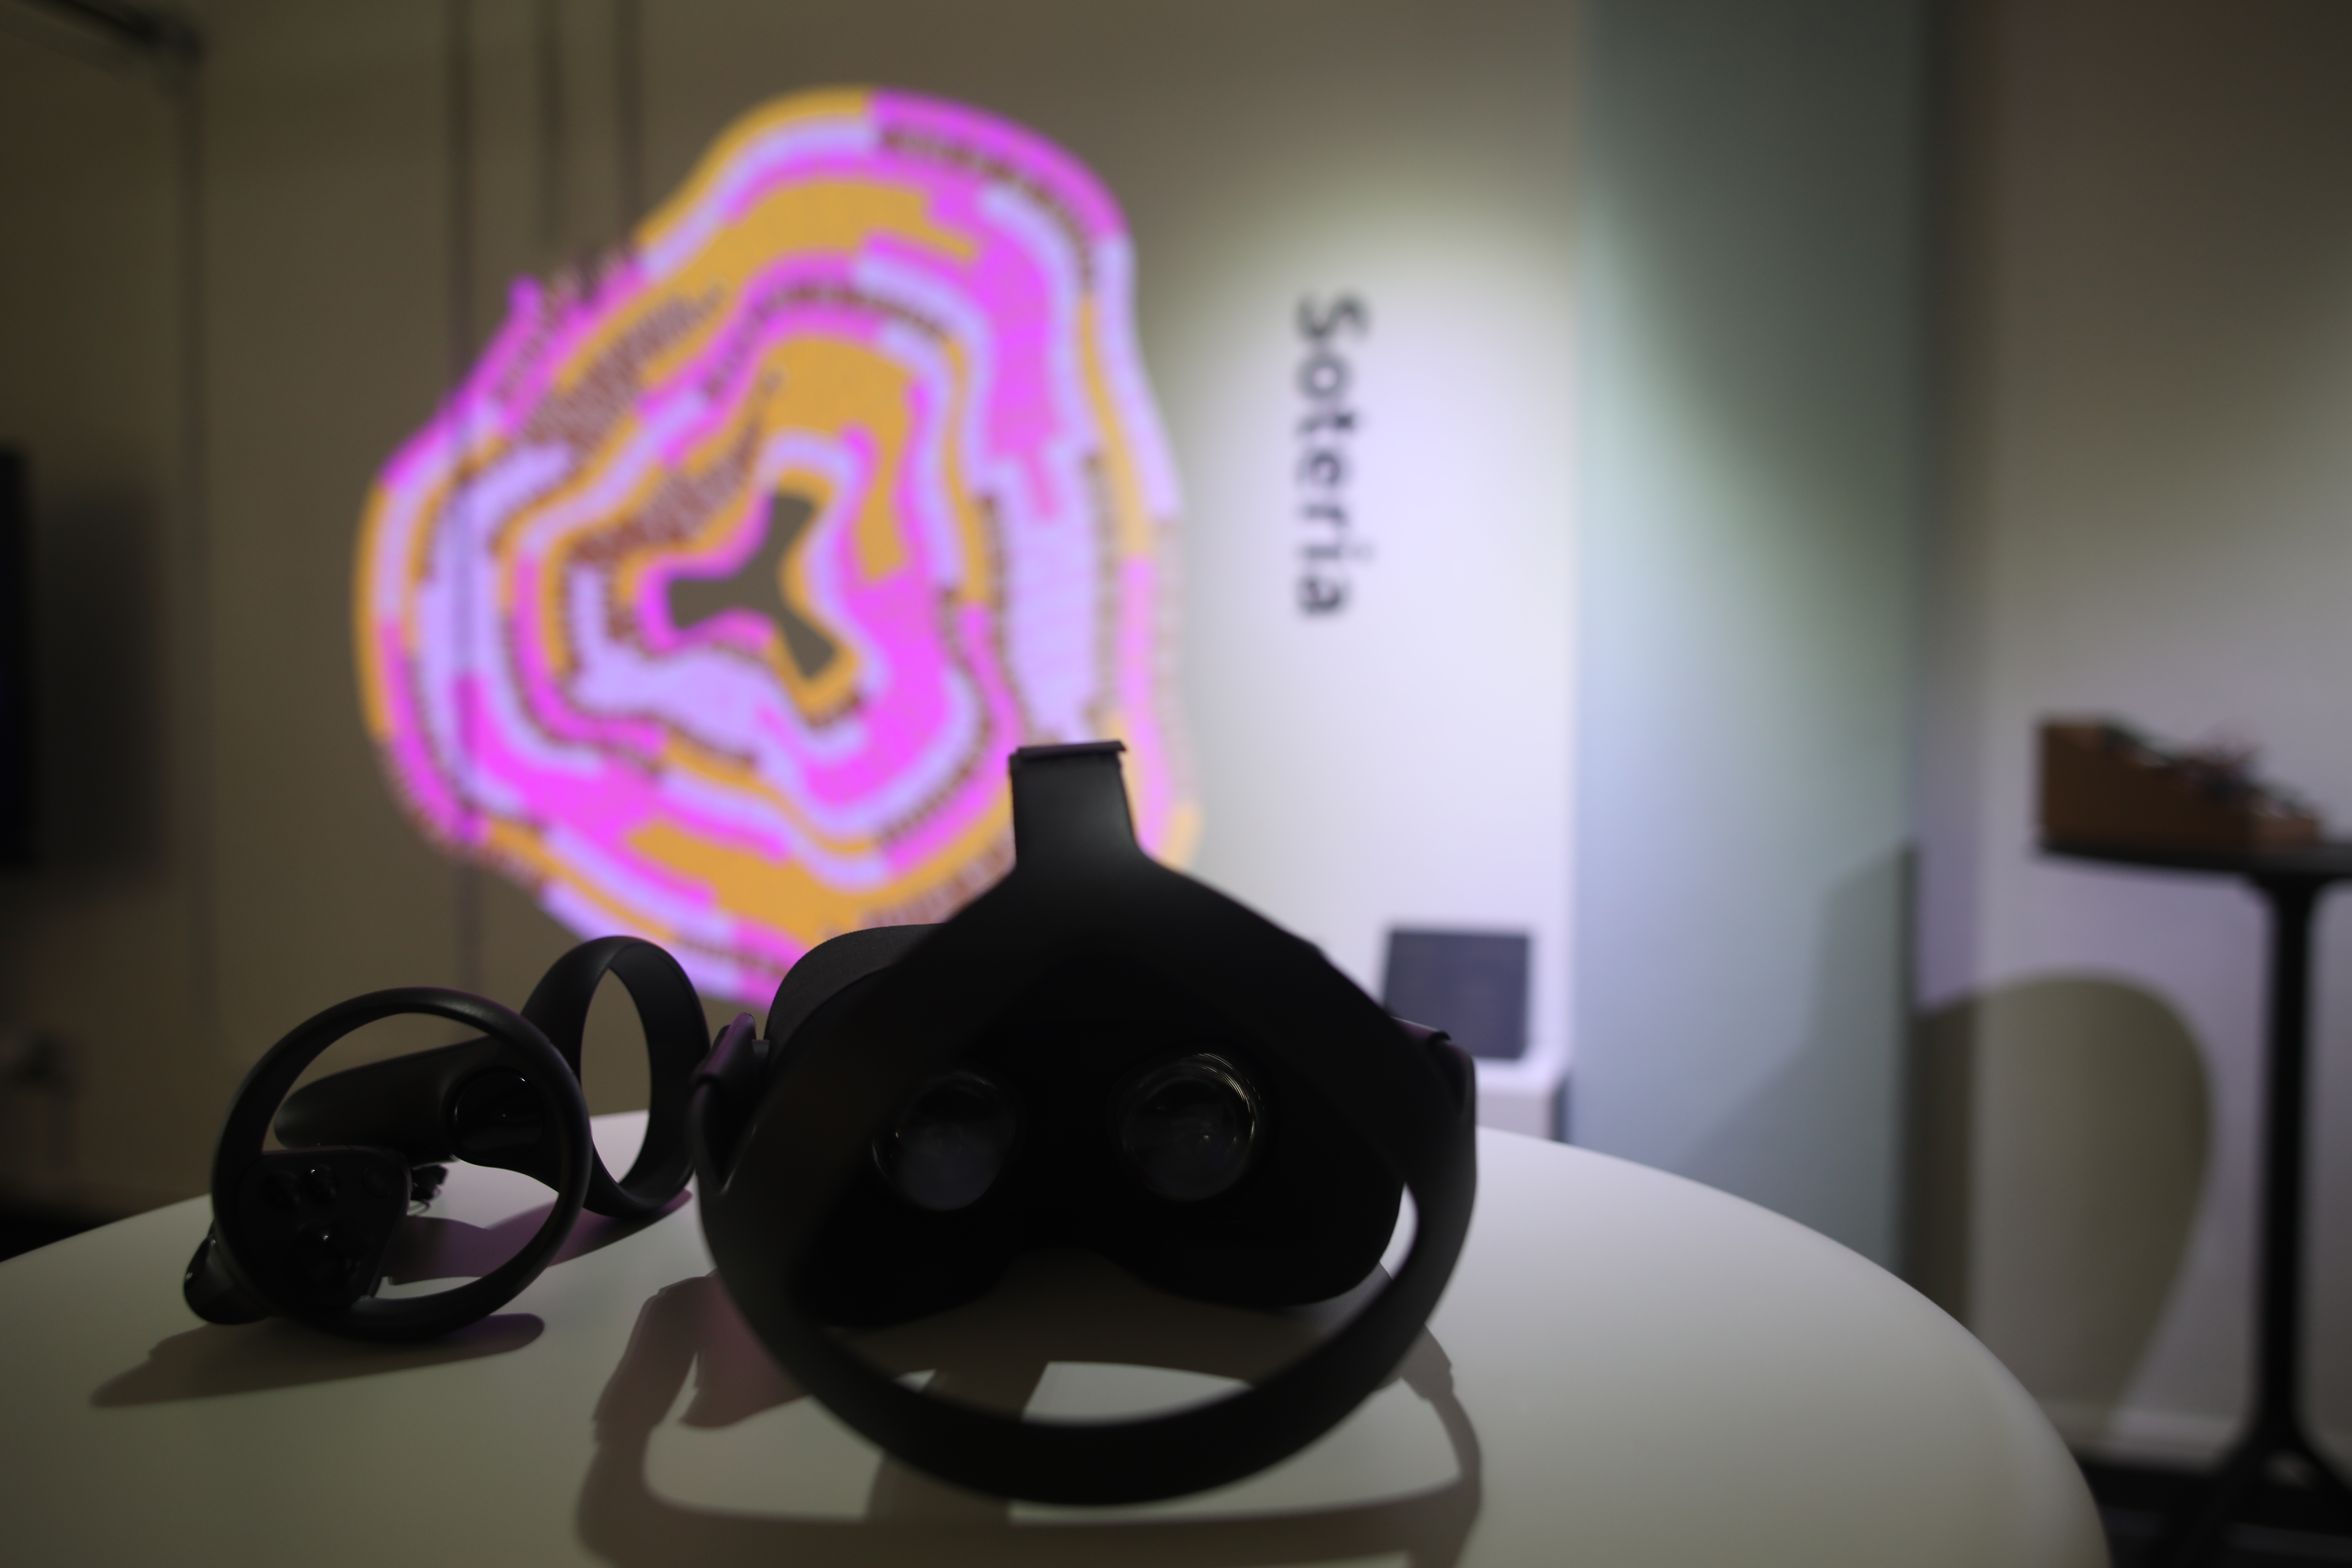 Oculus goggles on white table in front of the squiggly image with the word soteria repeated 